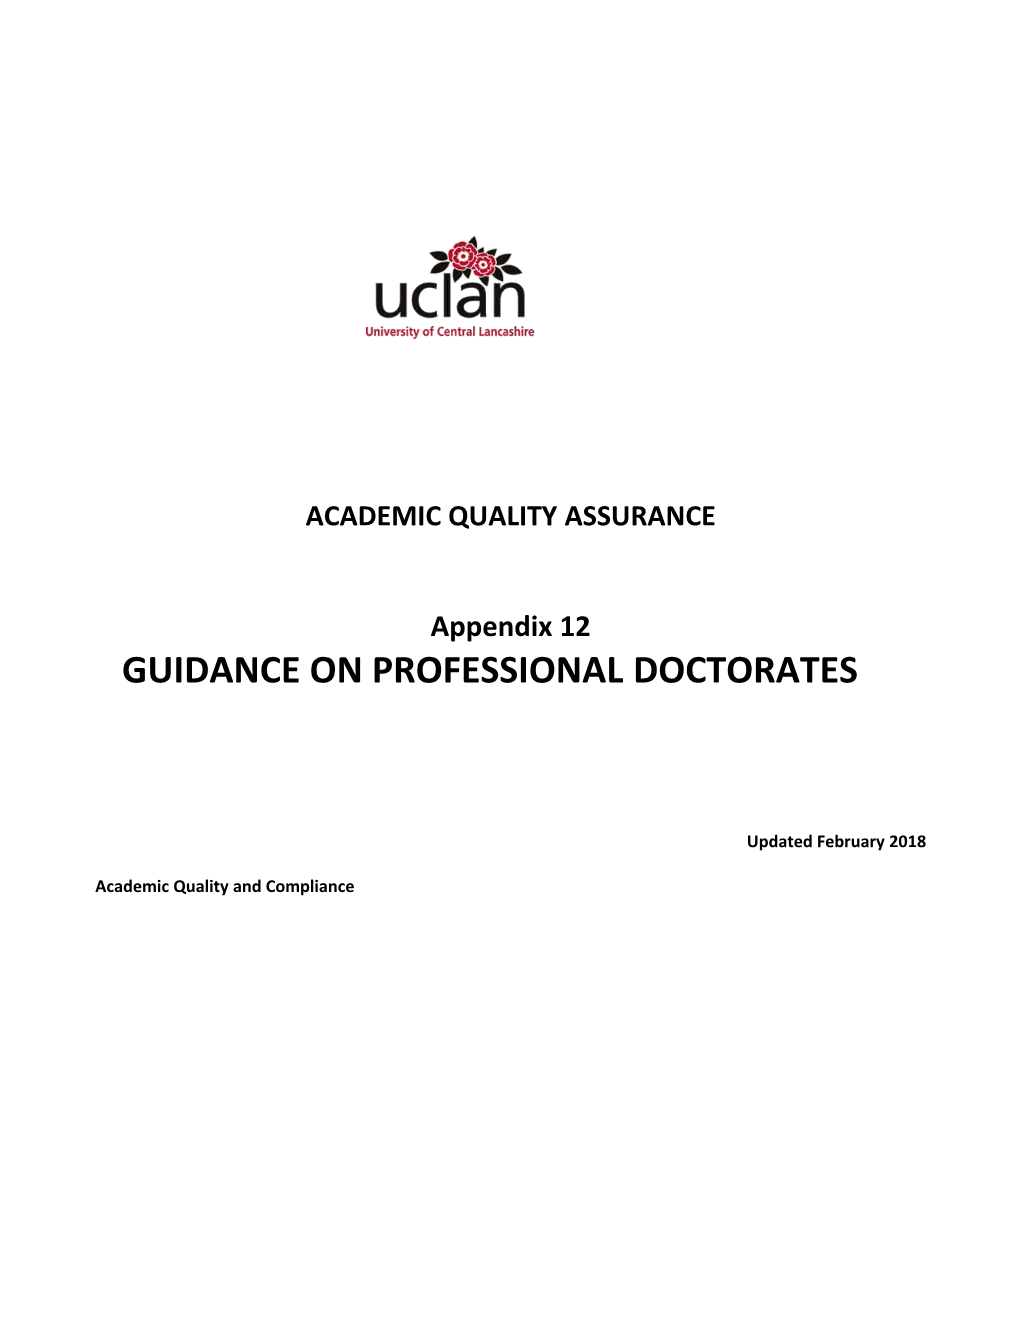 Guidance on Professional Doctorates